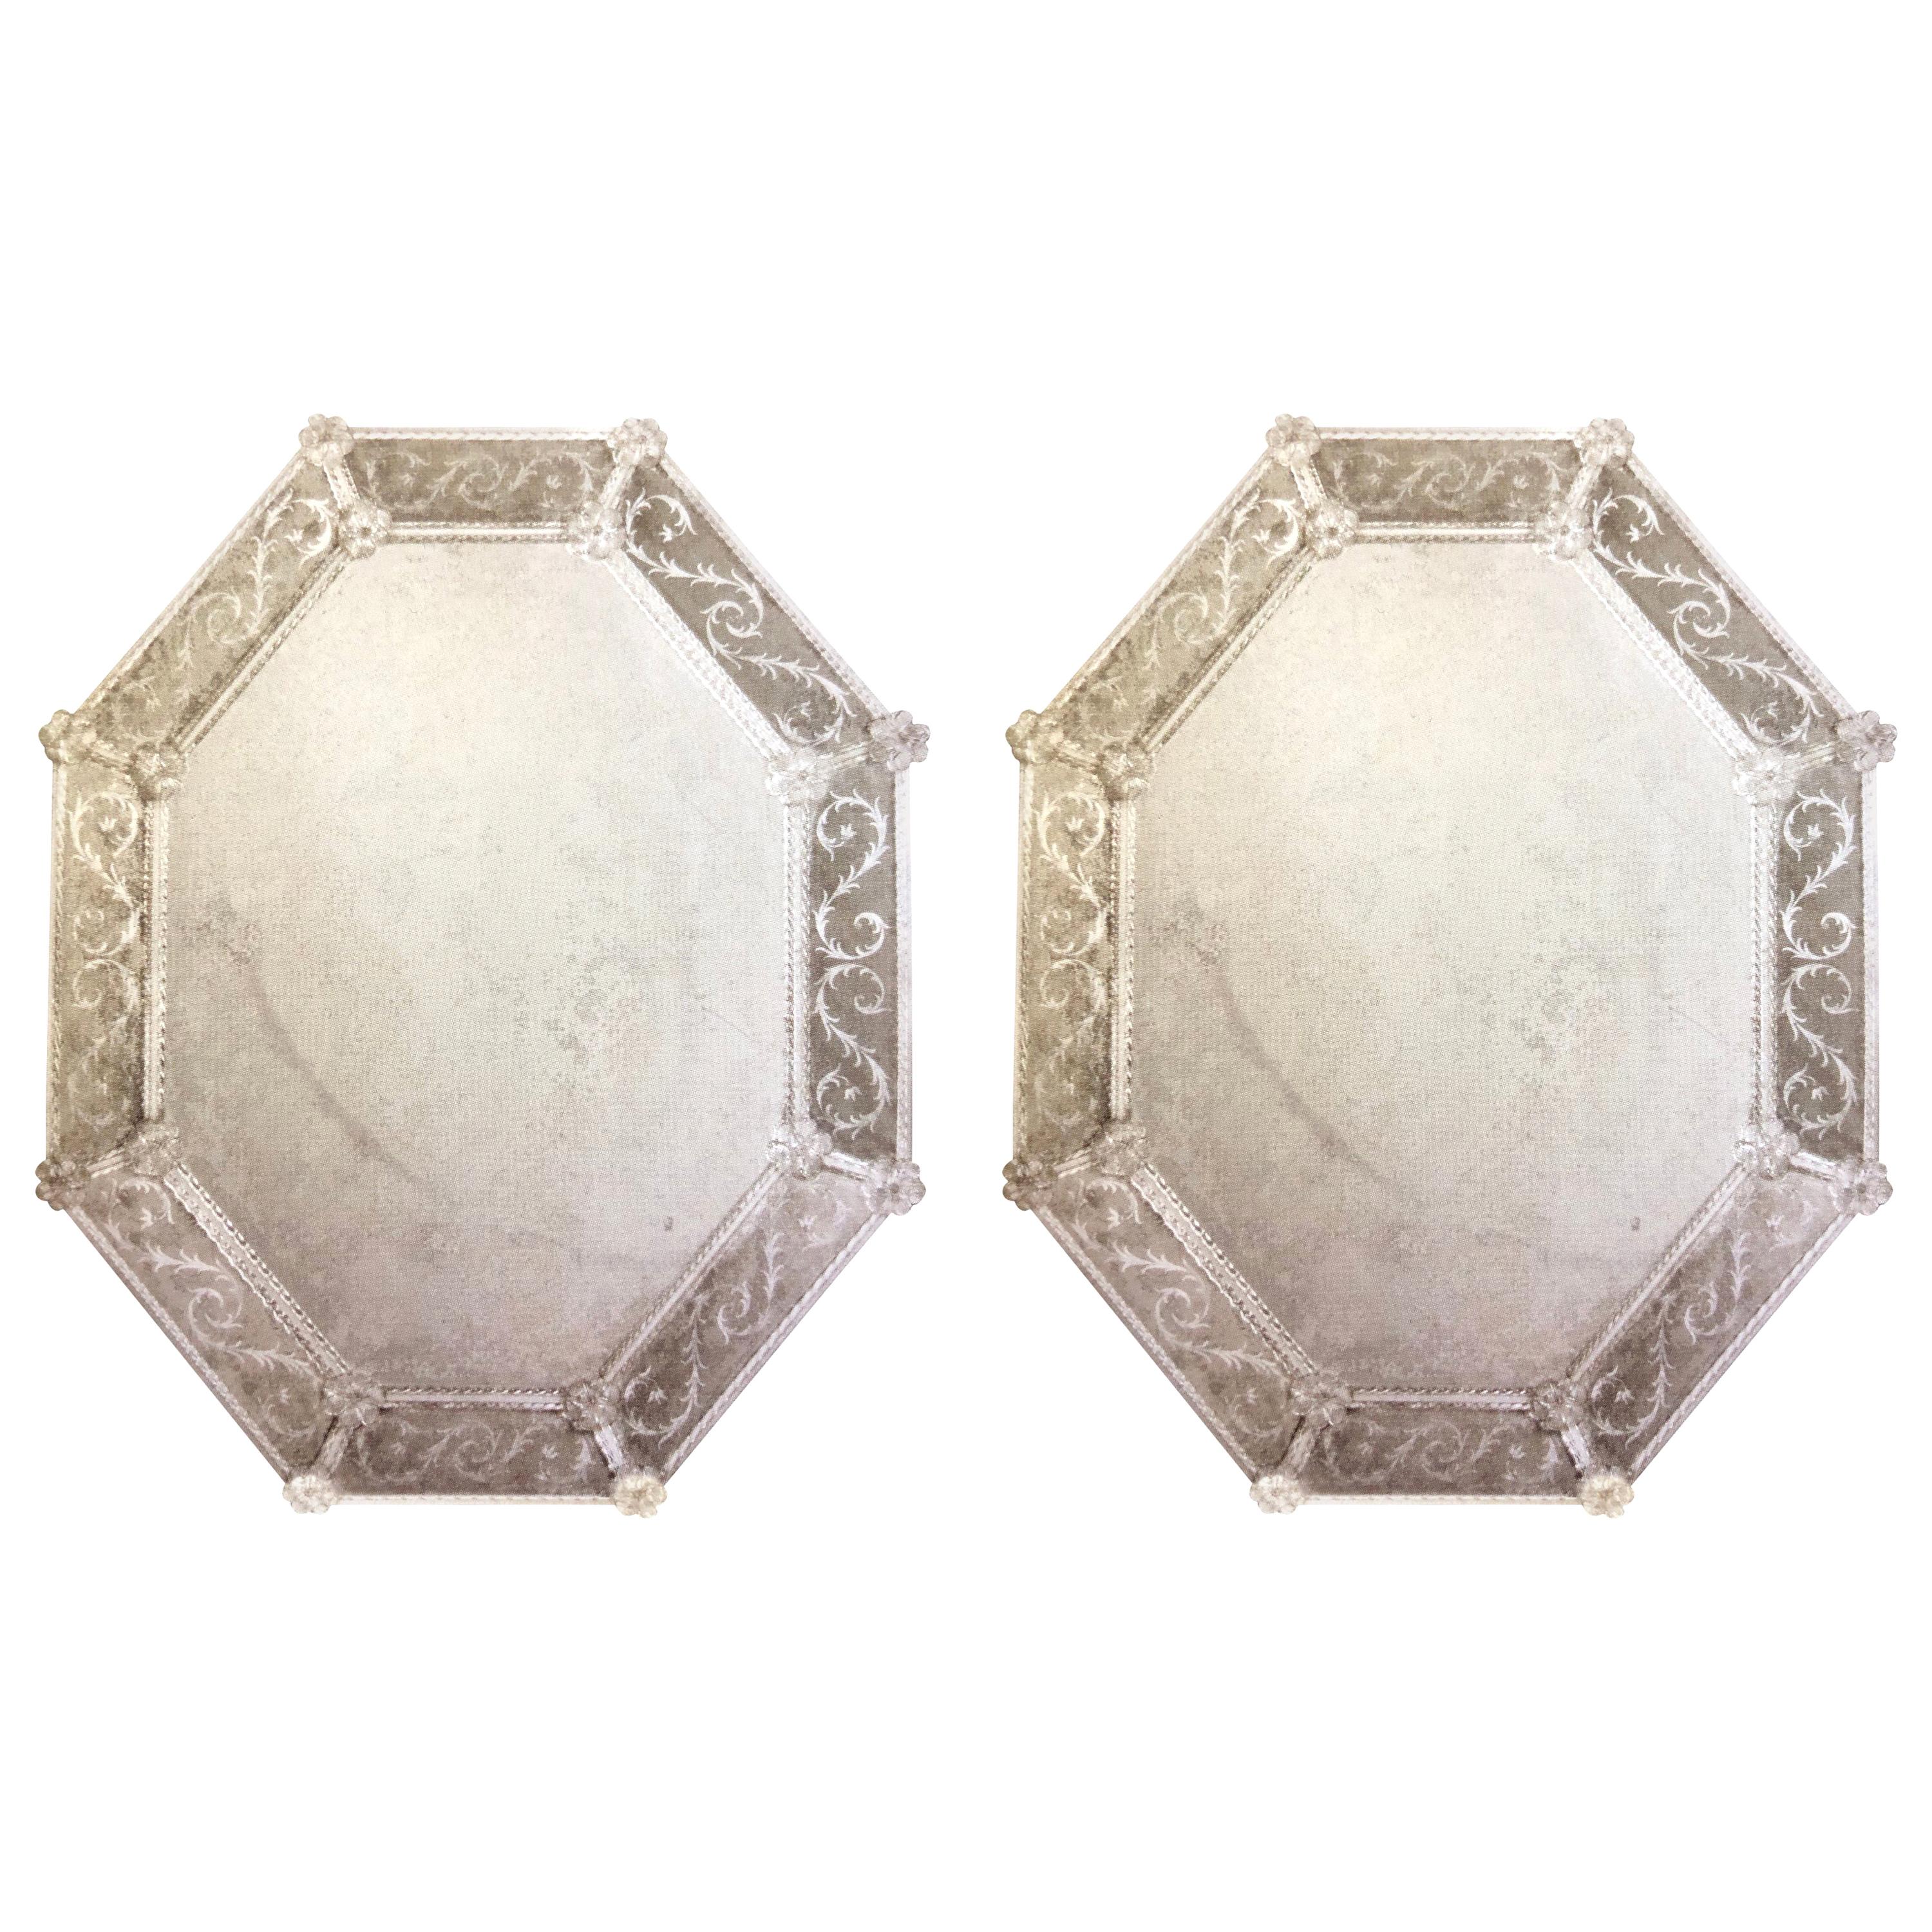 Two Large Antiqued and Etched Venetian / Murano Glass Octagonal Wall Mirrors